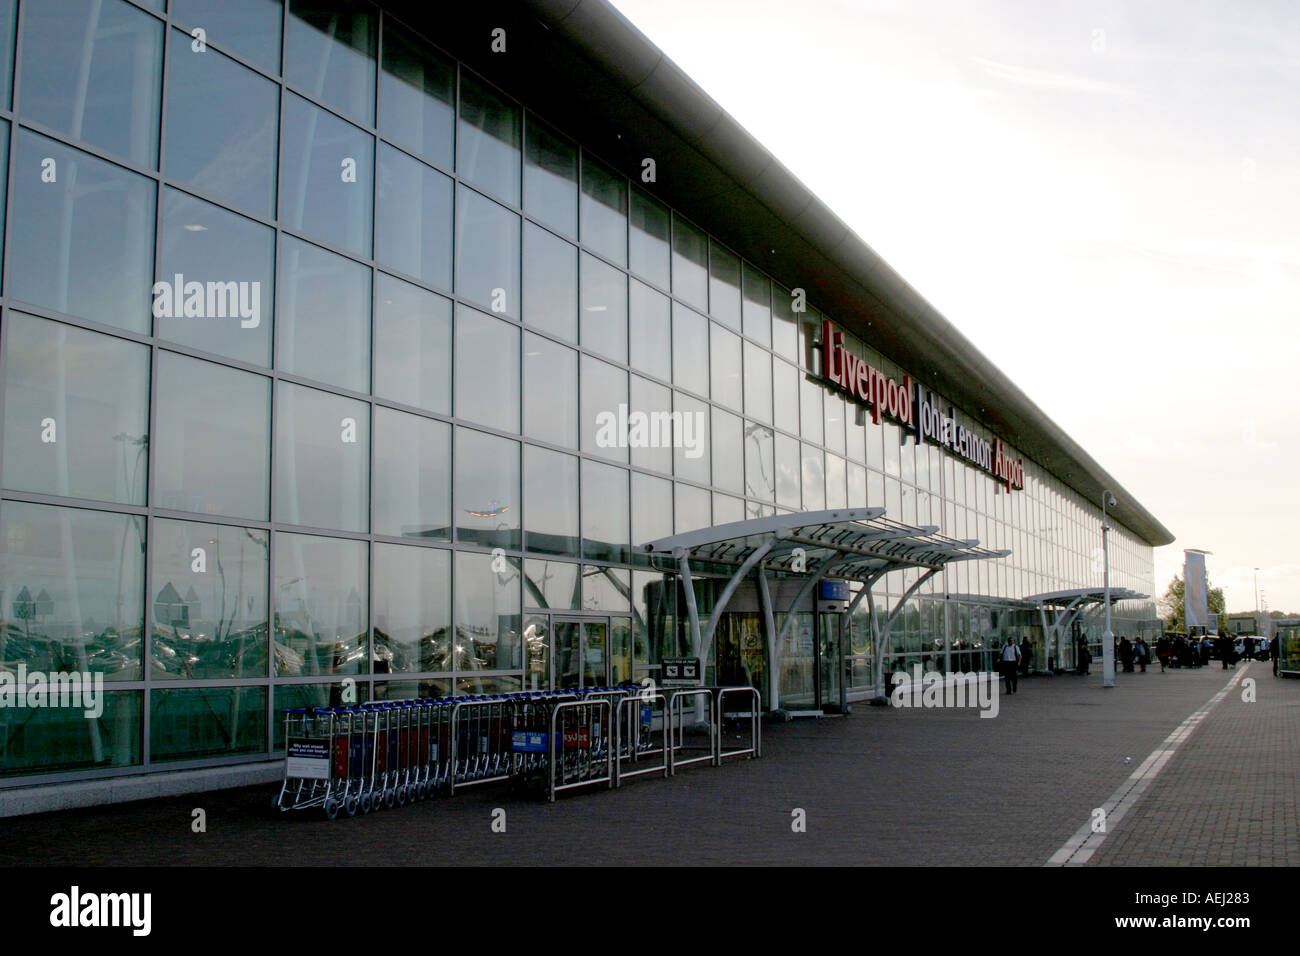 The Arrivals hall of the Liverpool John Lennon airport Stock Photo